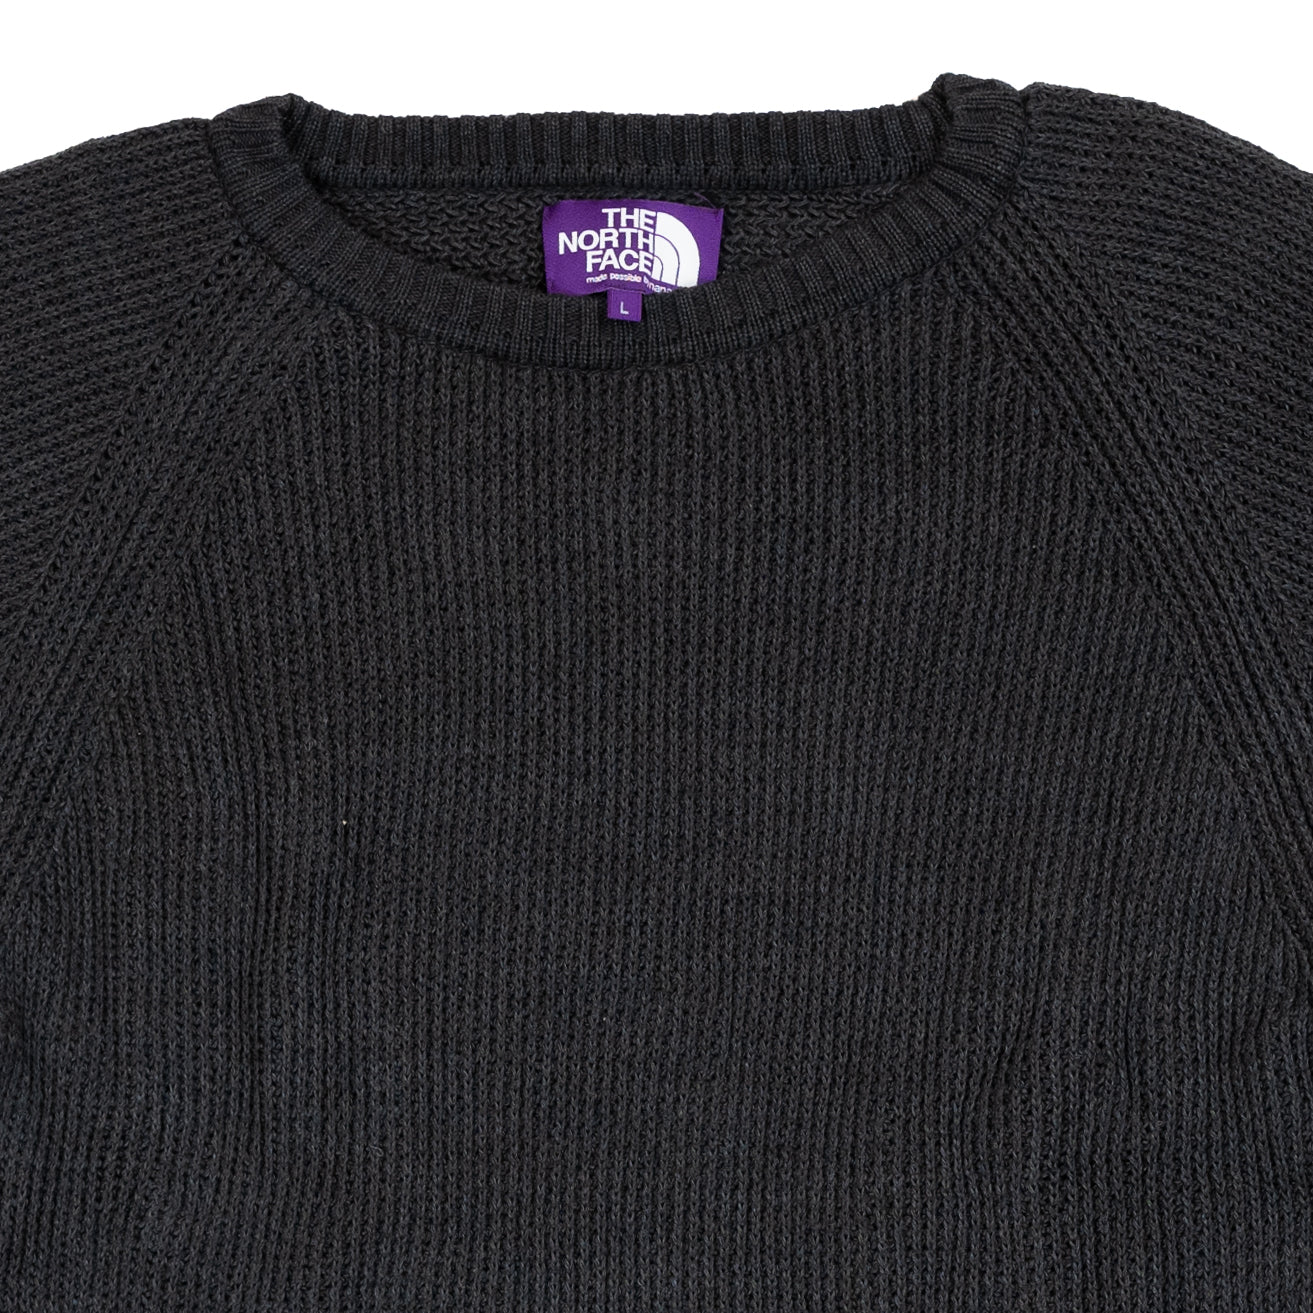 The North Face Purple Label Knit Crew Neck Sweater